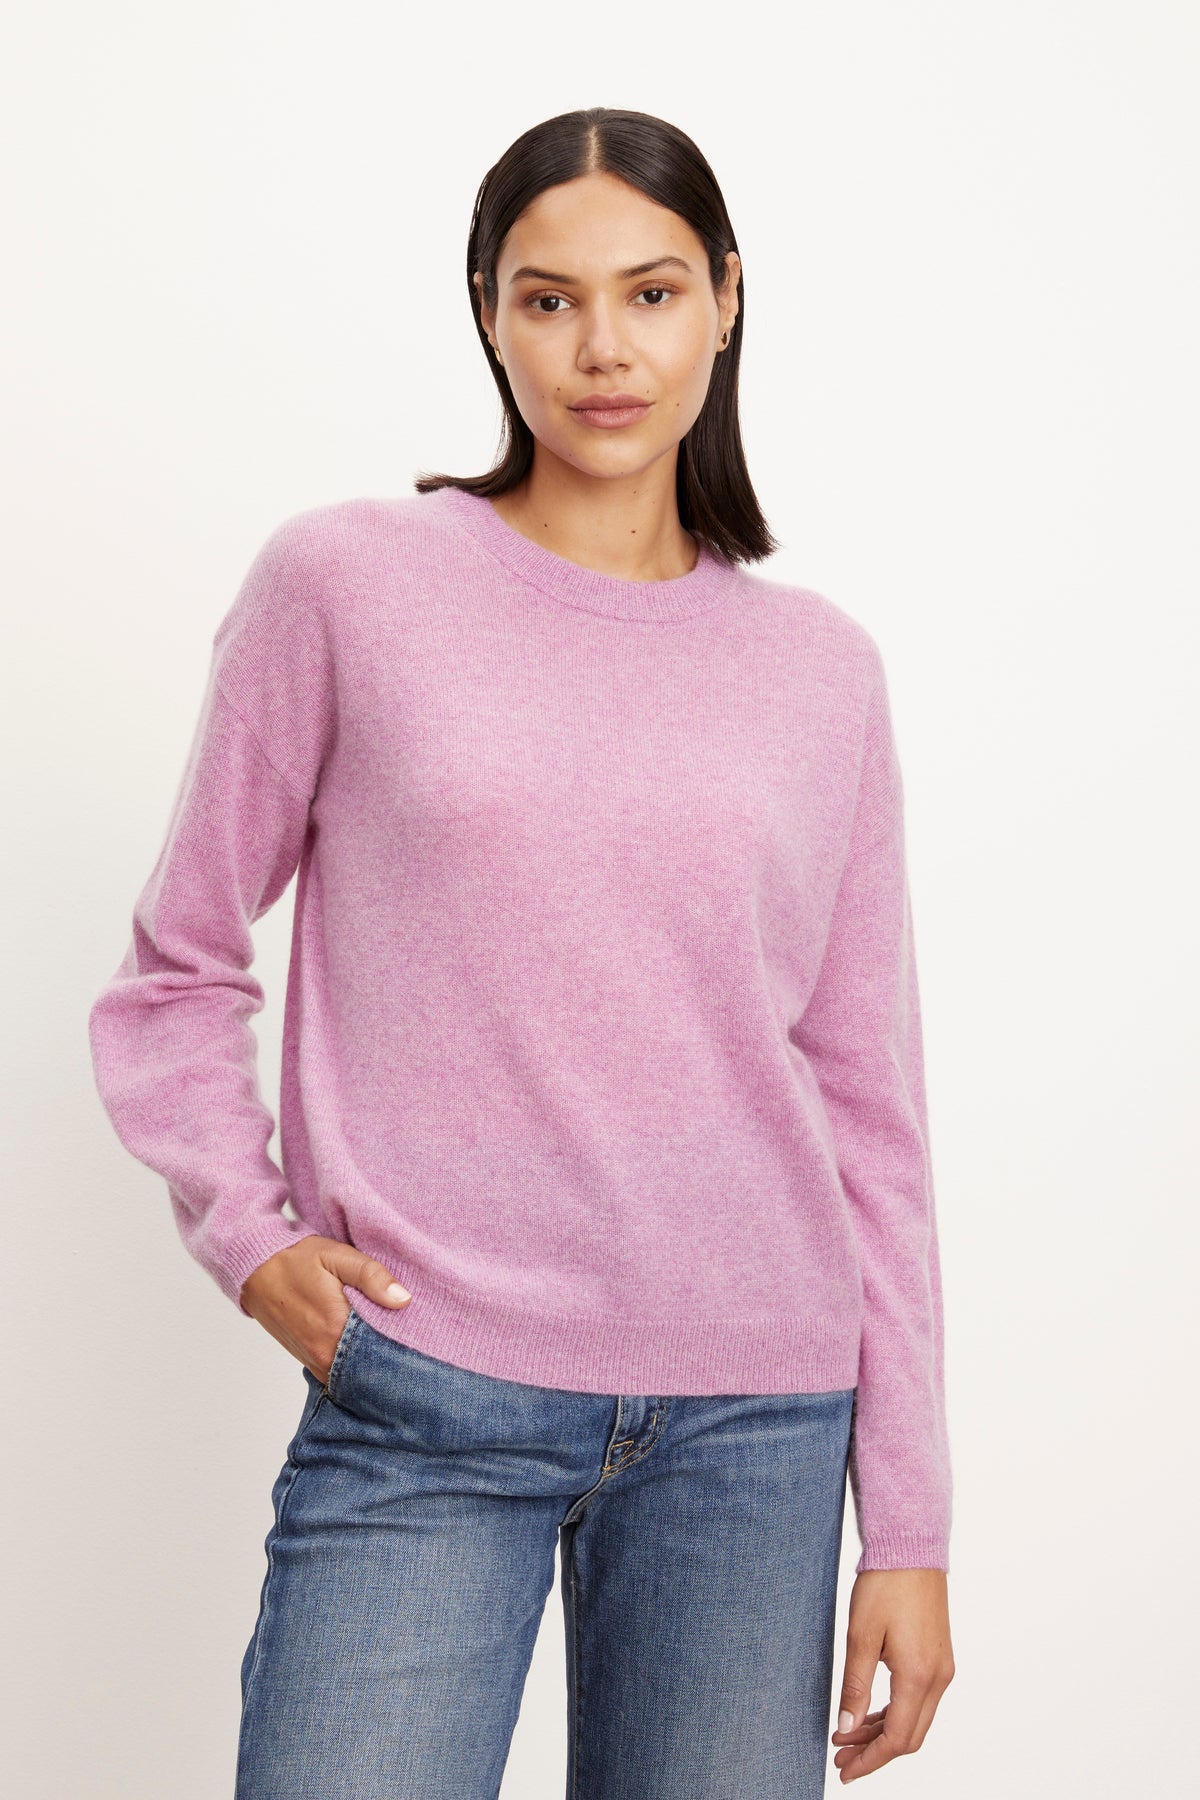 The BRYNNE cashmere crew neck sweater by Velvet by Graham & Spencer in lilac is a relaxed and cozy option.-26883604644033